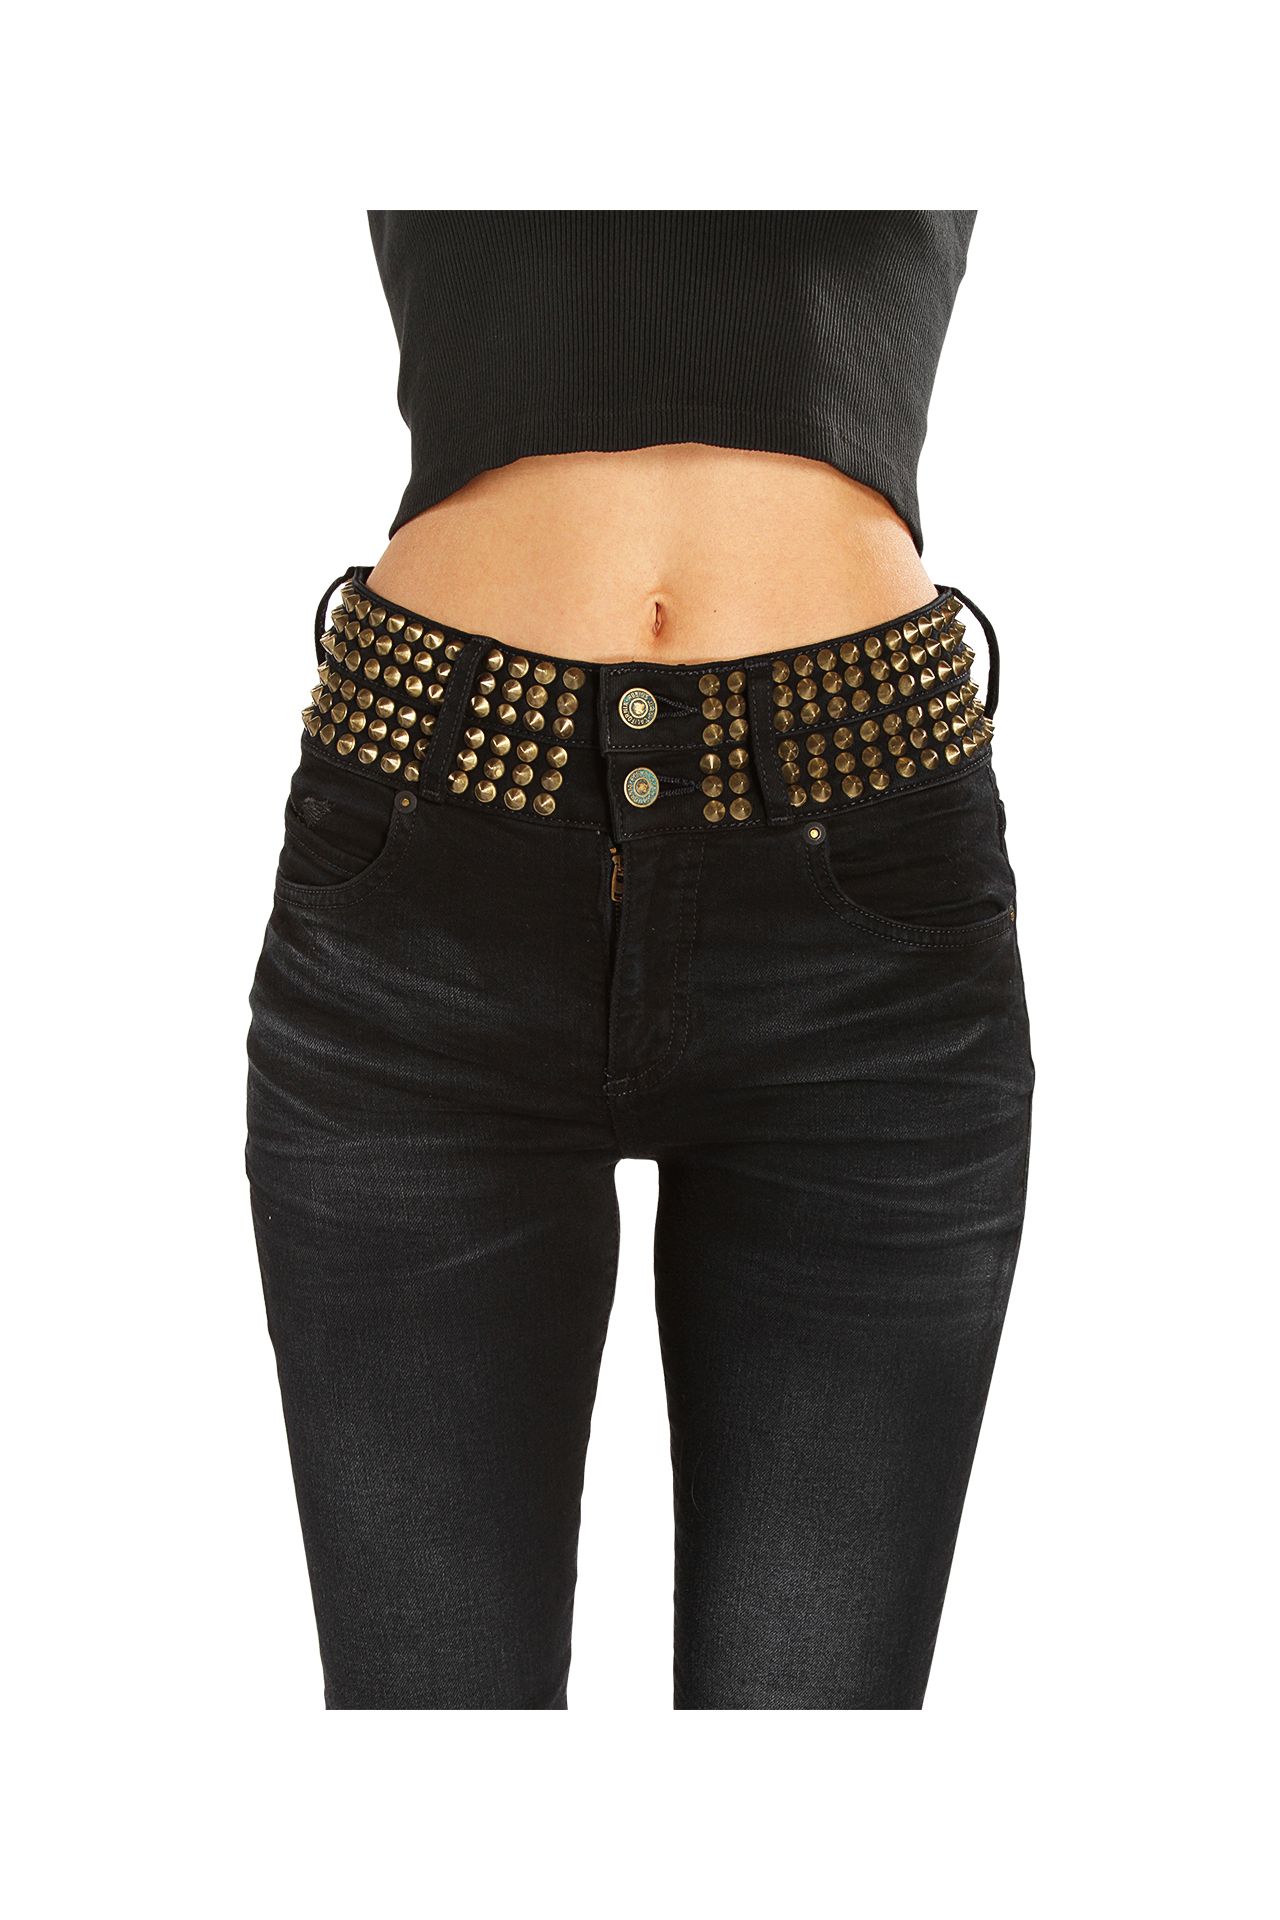 ROBIN'S DOUBLE WAIST SKINNY WITH SPIKES IN F-UP BLACK